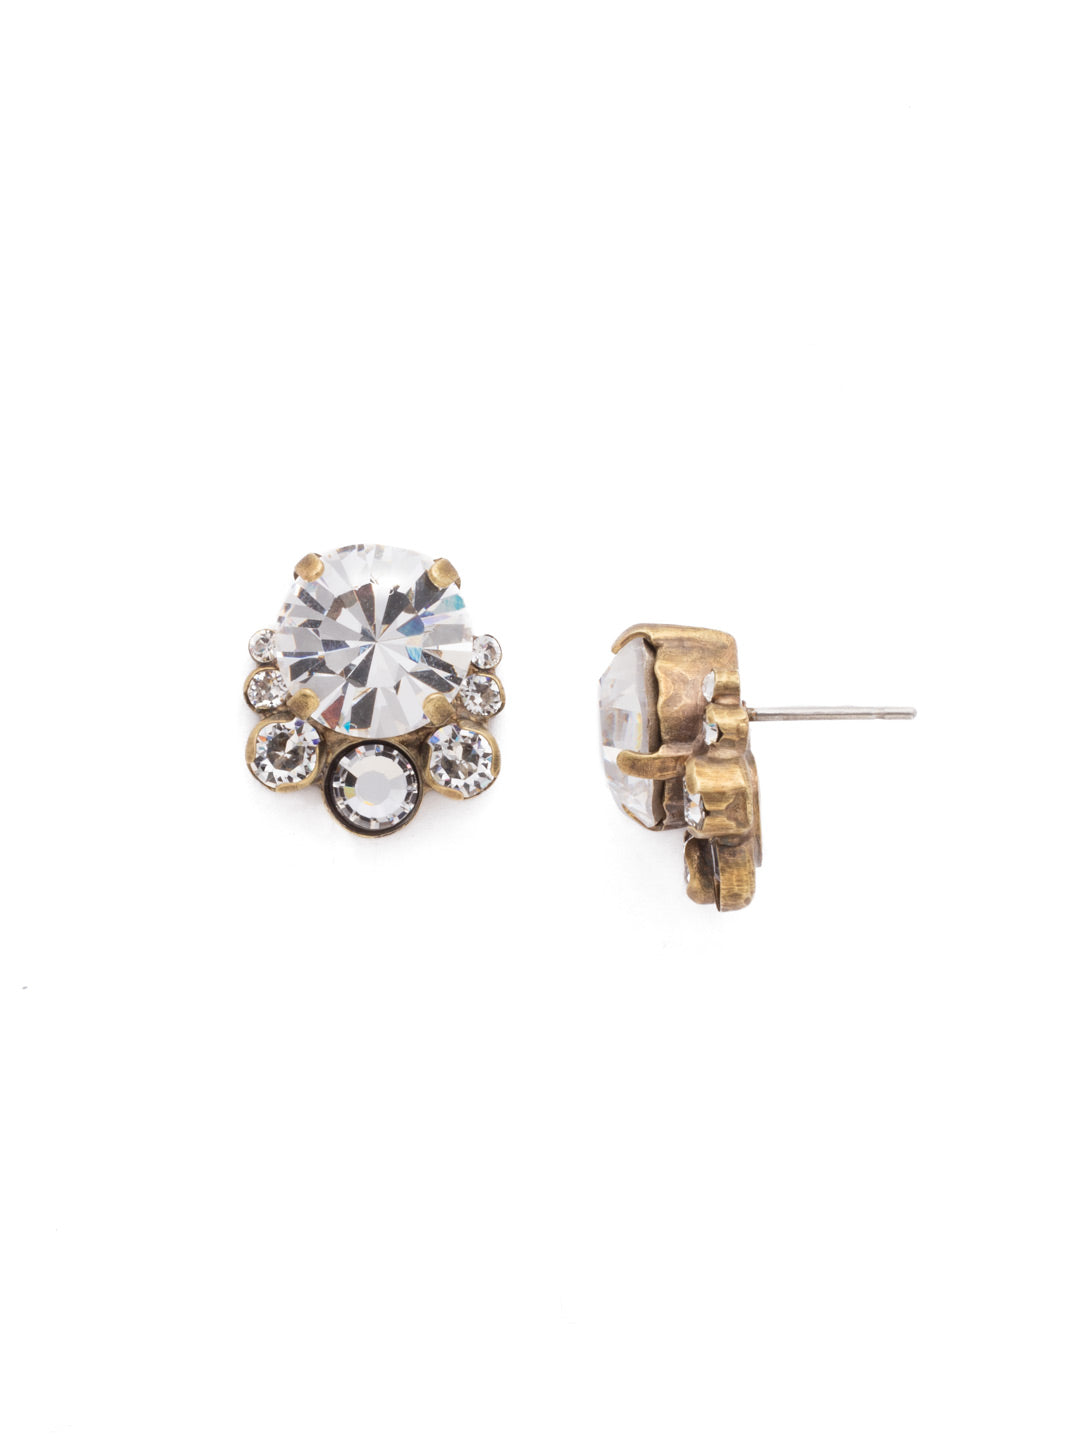 Product Image: Multi-Cut Round Crystal Cluster Stud Earrings